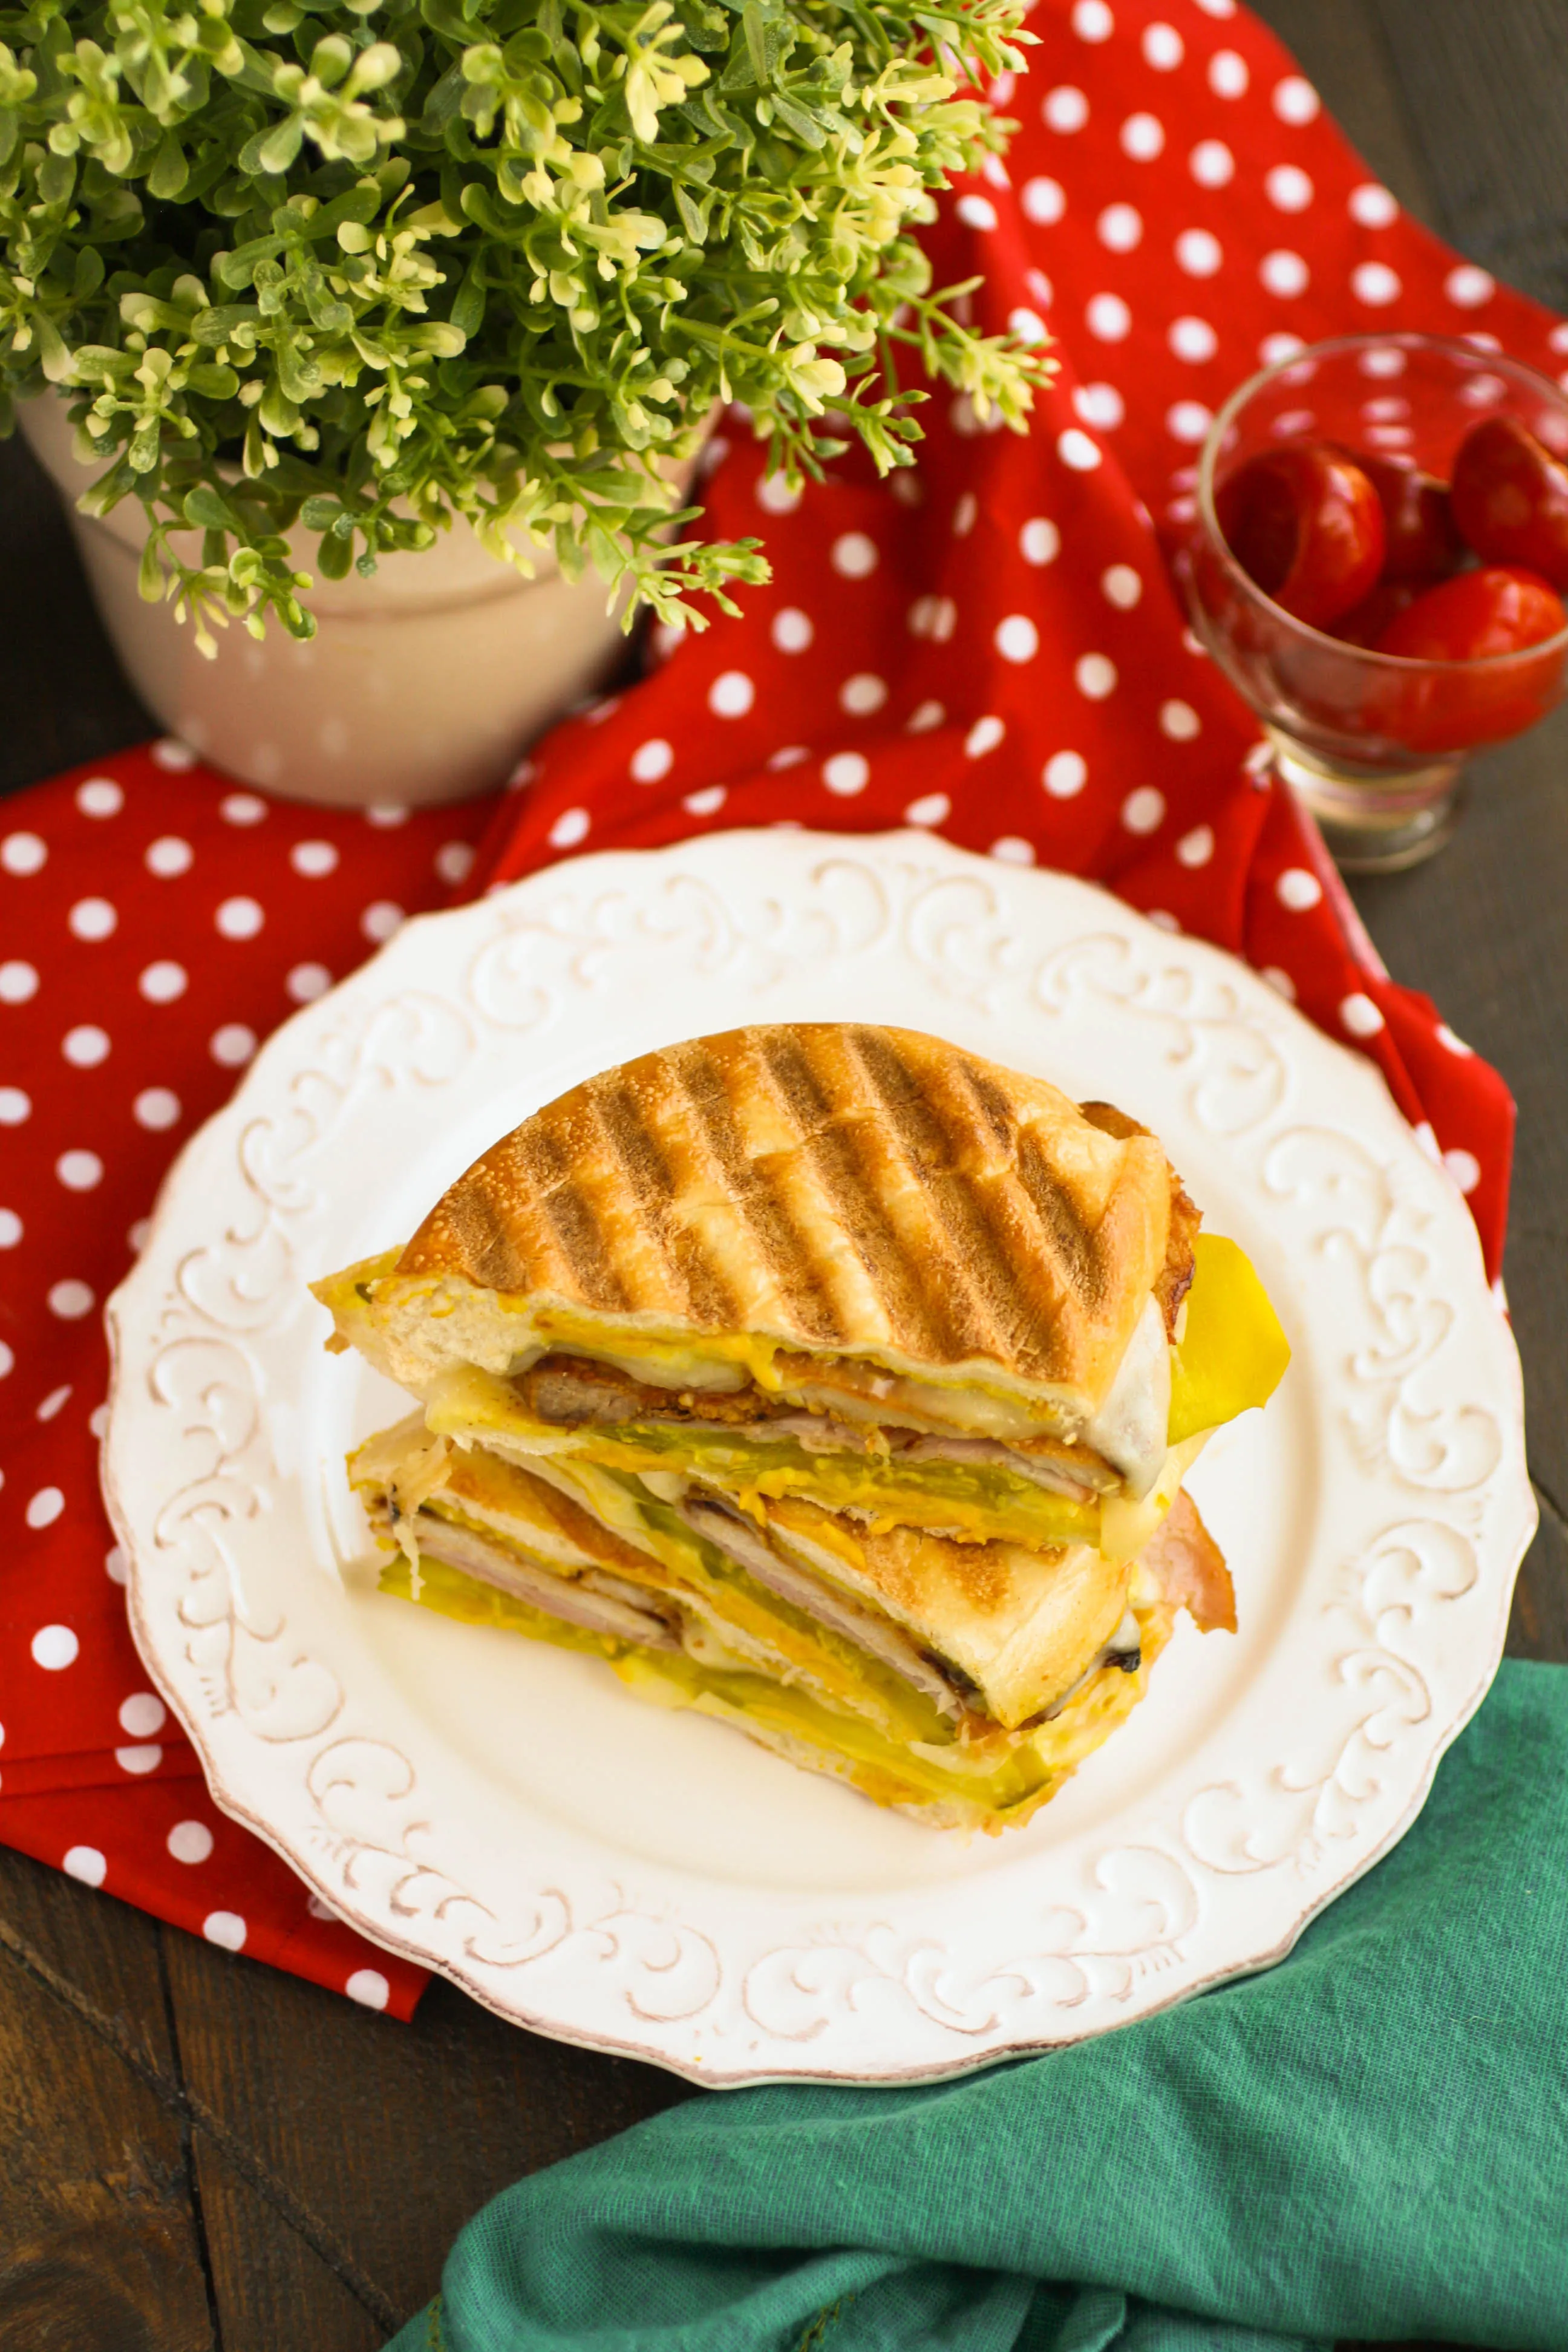 Make a Cuban Sandwich for your next meal! You'll be glad you did!